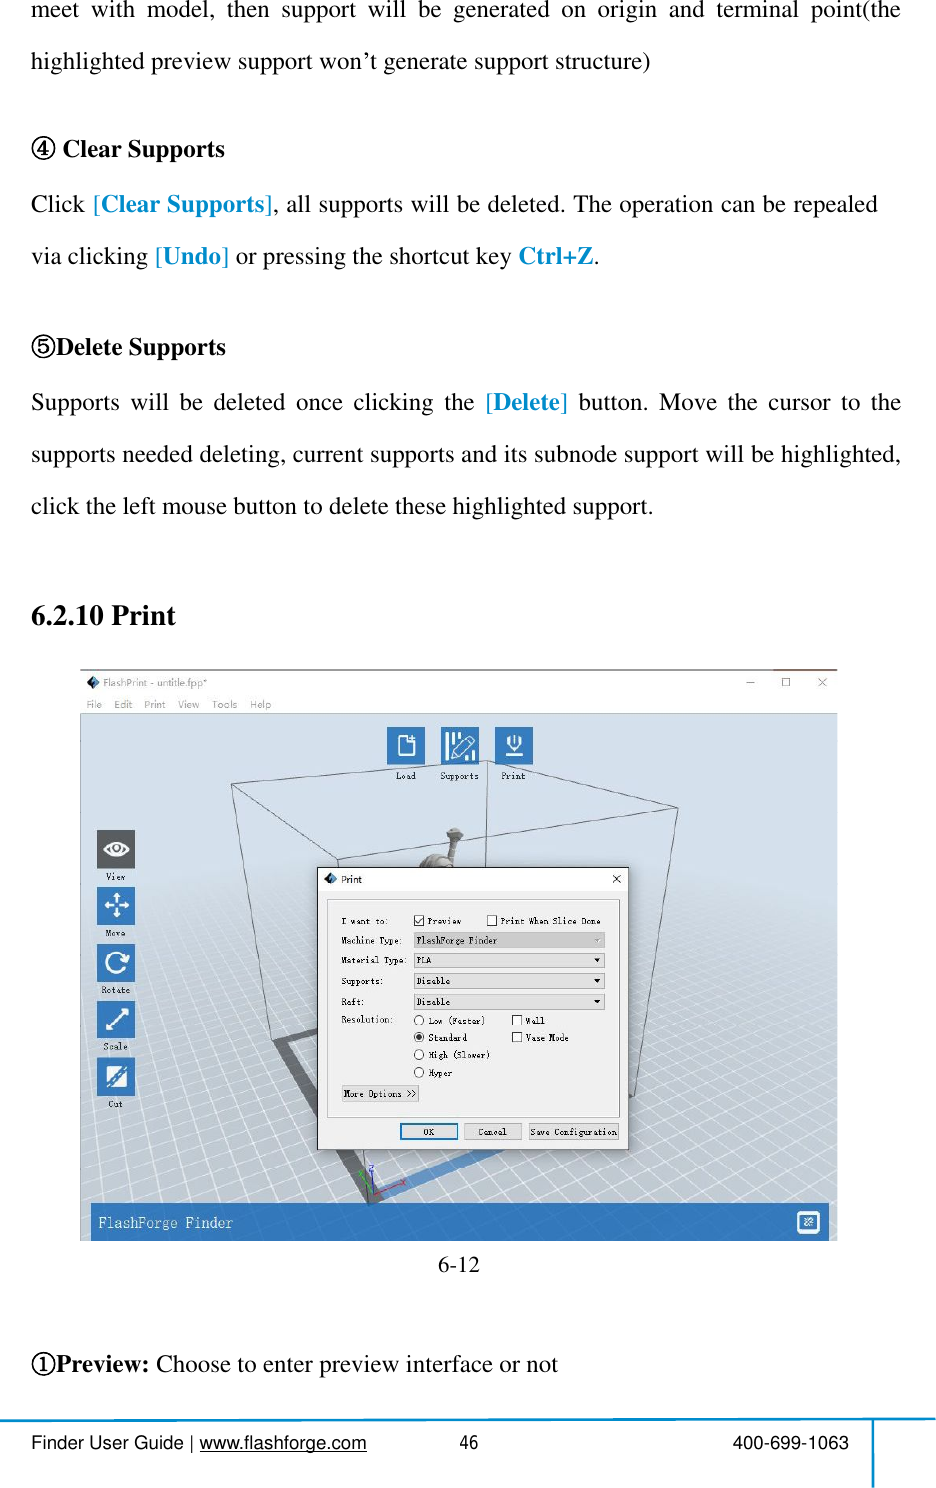  Finder User Guide|www.flashforge.com 400-699-106346meetwithmodel,thensupportwillbegeneratedonoriginandterminalpoint(thehighlightedpreview supportwon tgenerate support structure)Clear SupportsClick [ClearSupports],allsupportswillbedeleted.Theoperationcanberepealedvia clicking [Undo] orpressingtheshortcut key Ctrl+Z.Delete SupportsSupportswillbedeletedonceclickingthe [Delete]button.Movethecursortothesupportsneededdeleting,currentsupportsanditssubnodesupportwillbehighlighted,clicktheleftmouse buttonto deletethesehighlighted support.6.2.10PrintPreview: Choosetoenter previewinterface ornot6-12